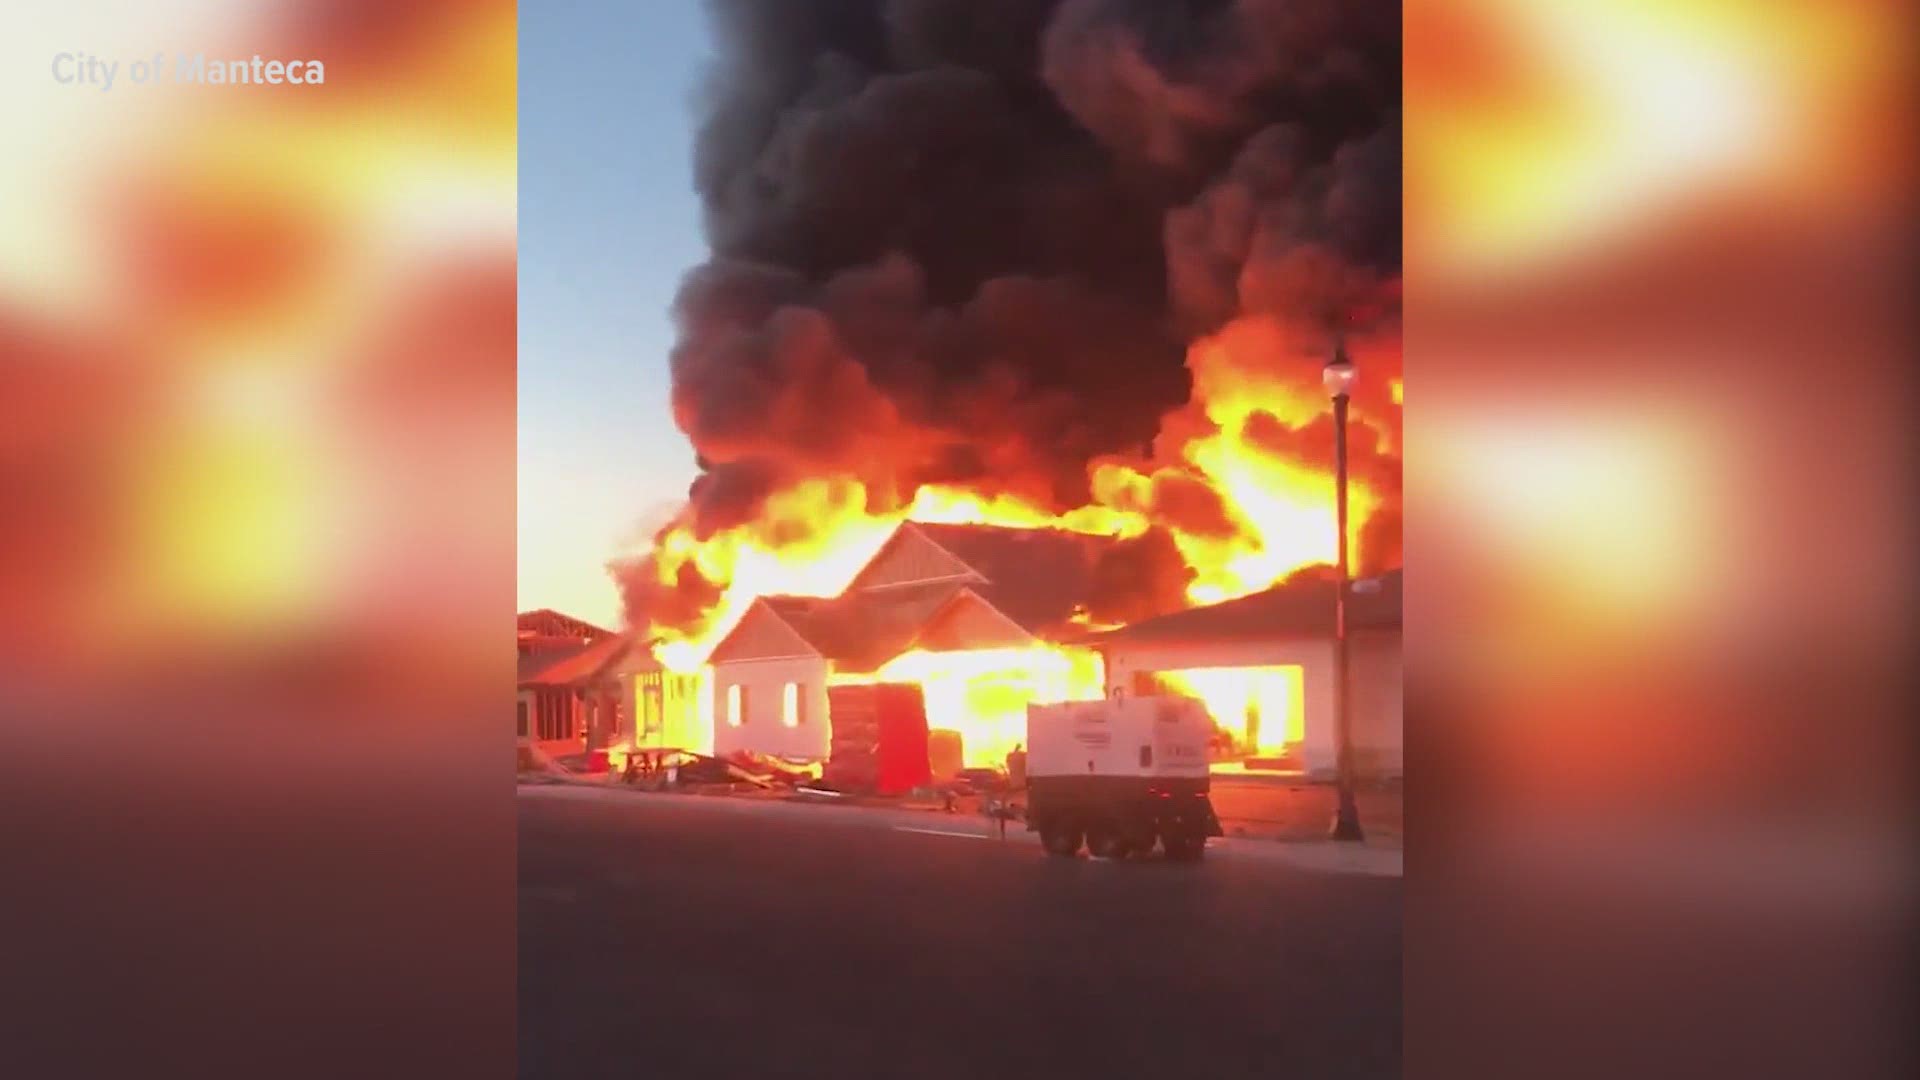 Manteca firefighters are investigating the cause of an early morning fire in a subdivision Thursday. The subdivision near Memorial Lane and Heartland Drive is currently under construction, there were no residents in the four homes that burned.